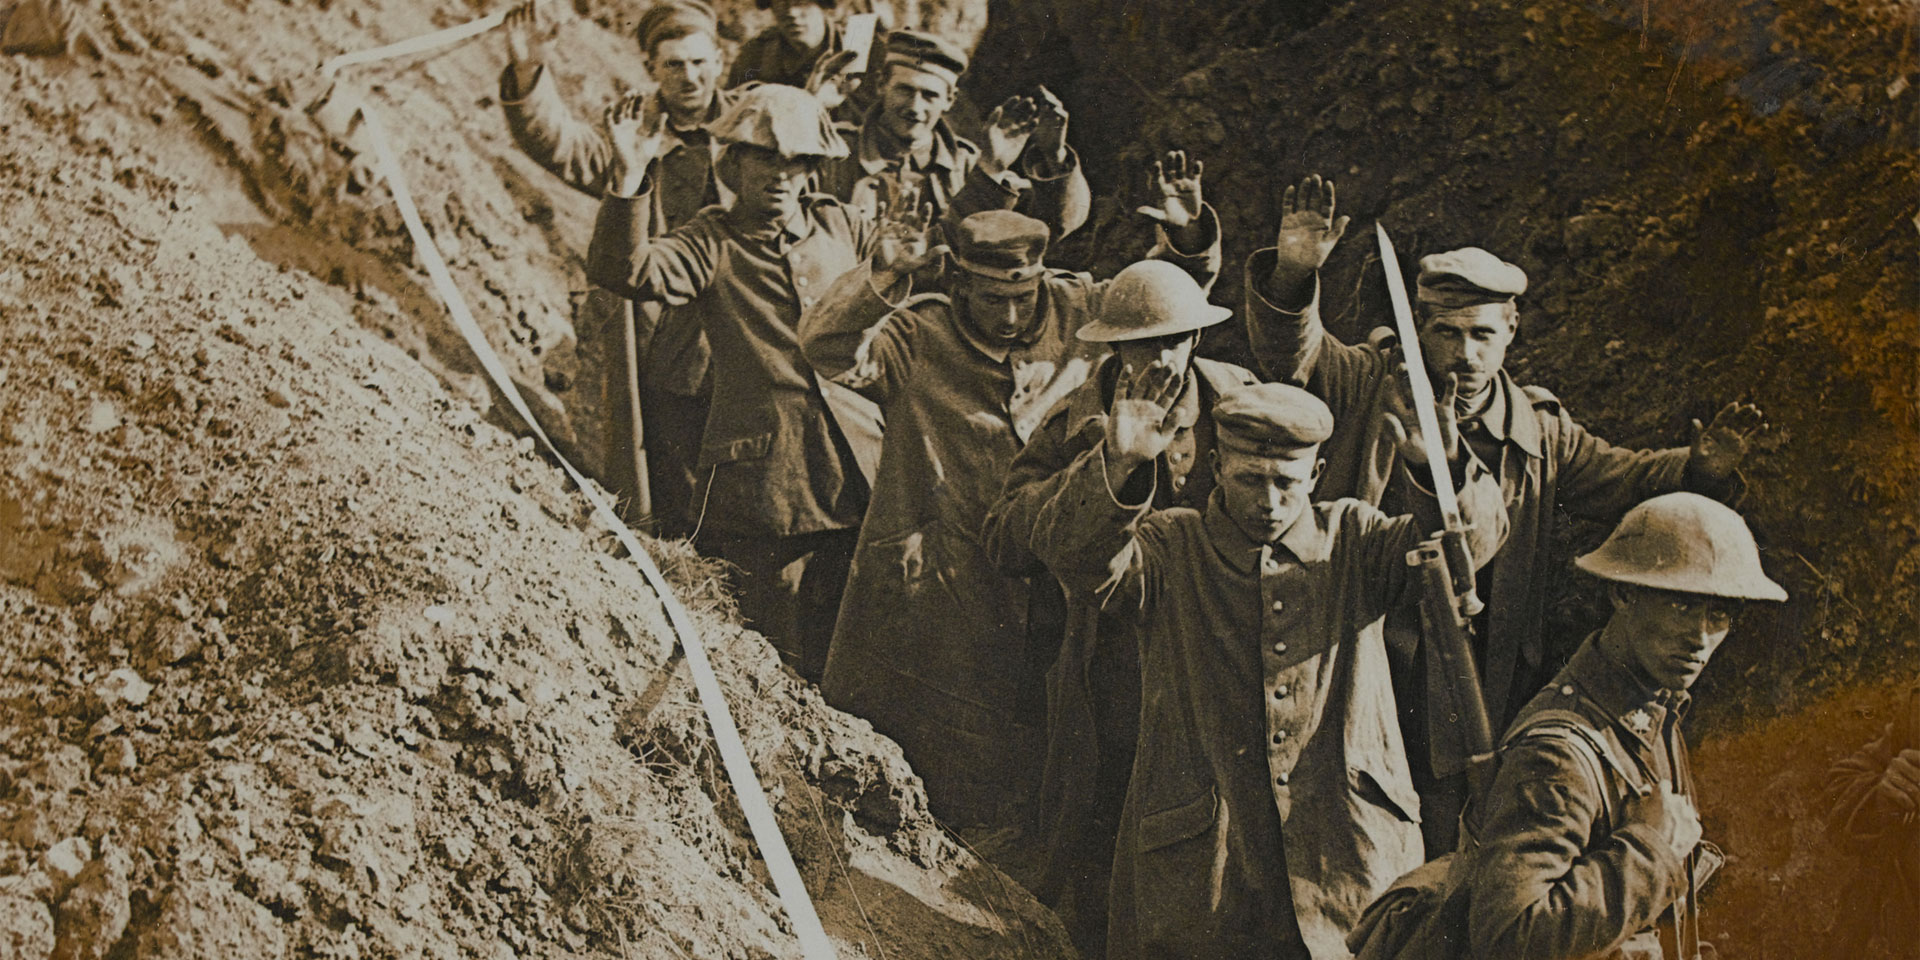 Canadian soldiers escorting German prisoners through a trench, August 1918